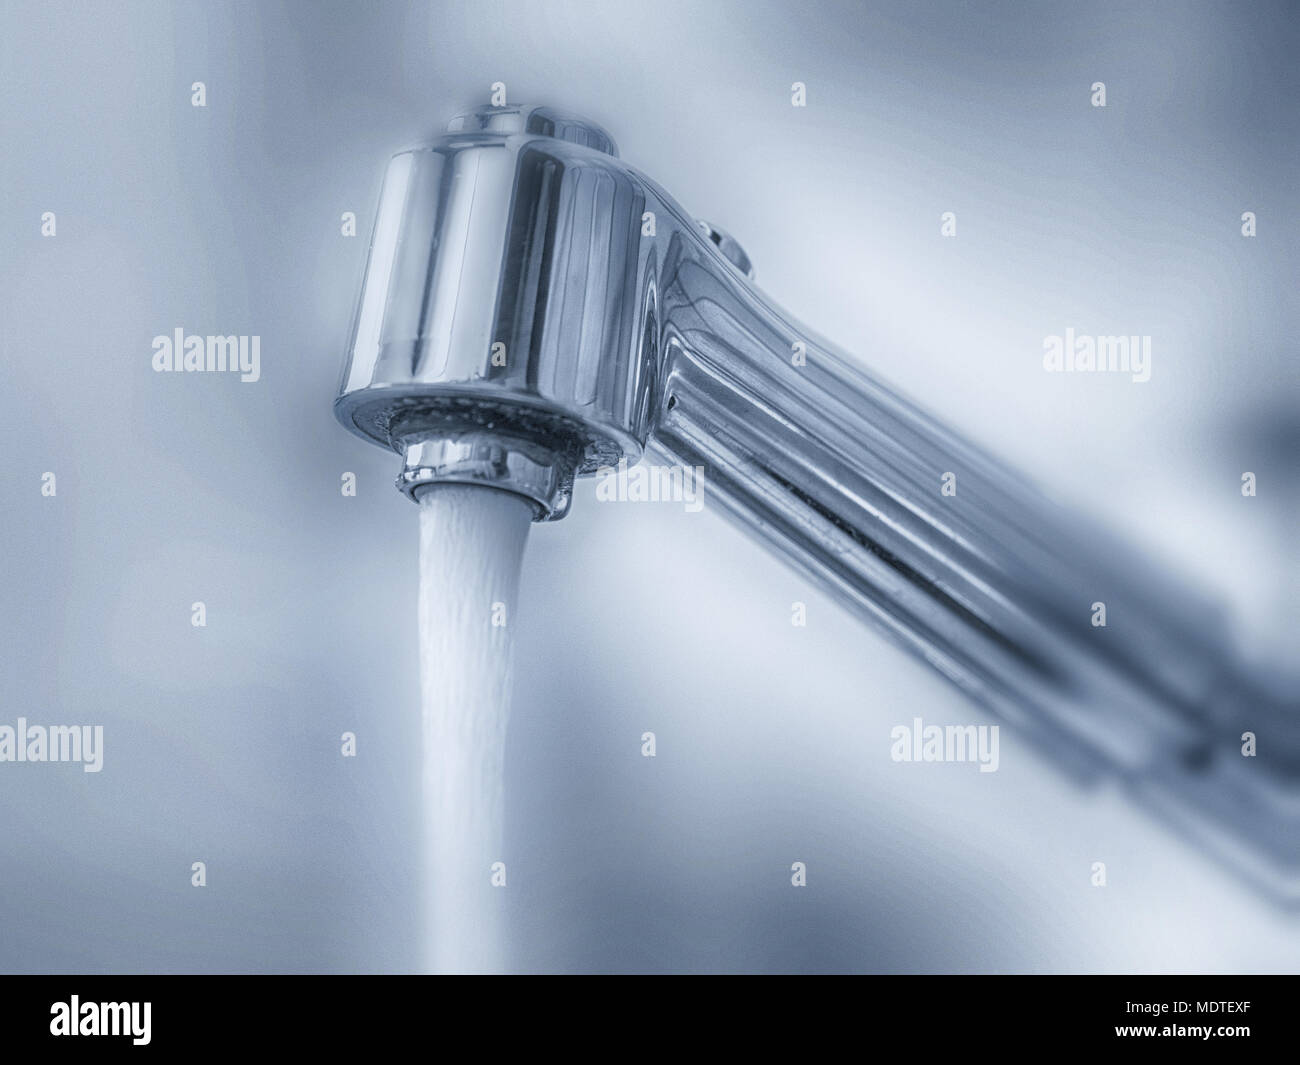 Clean water from the tap Stock Photo